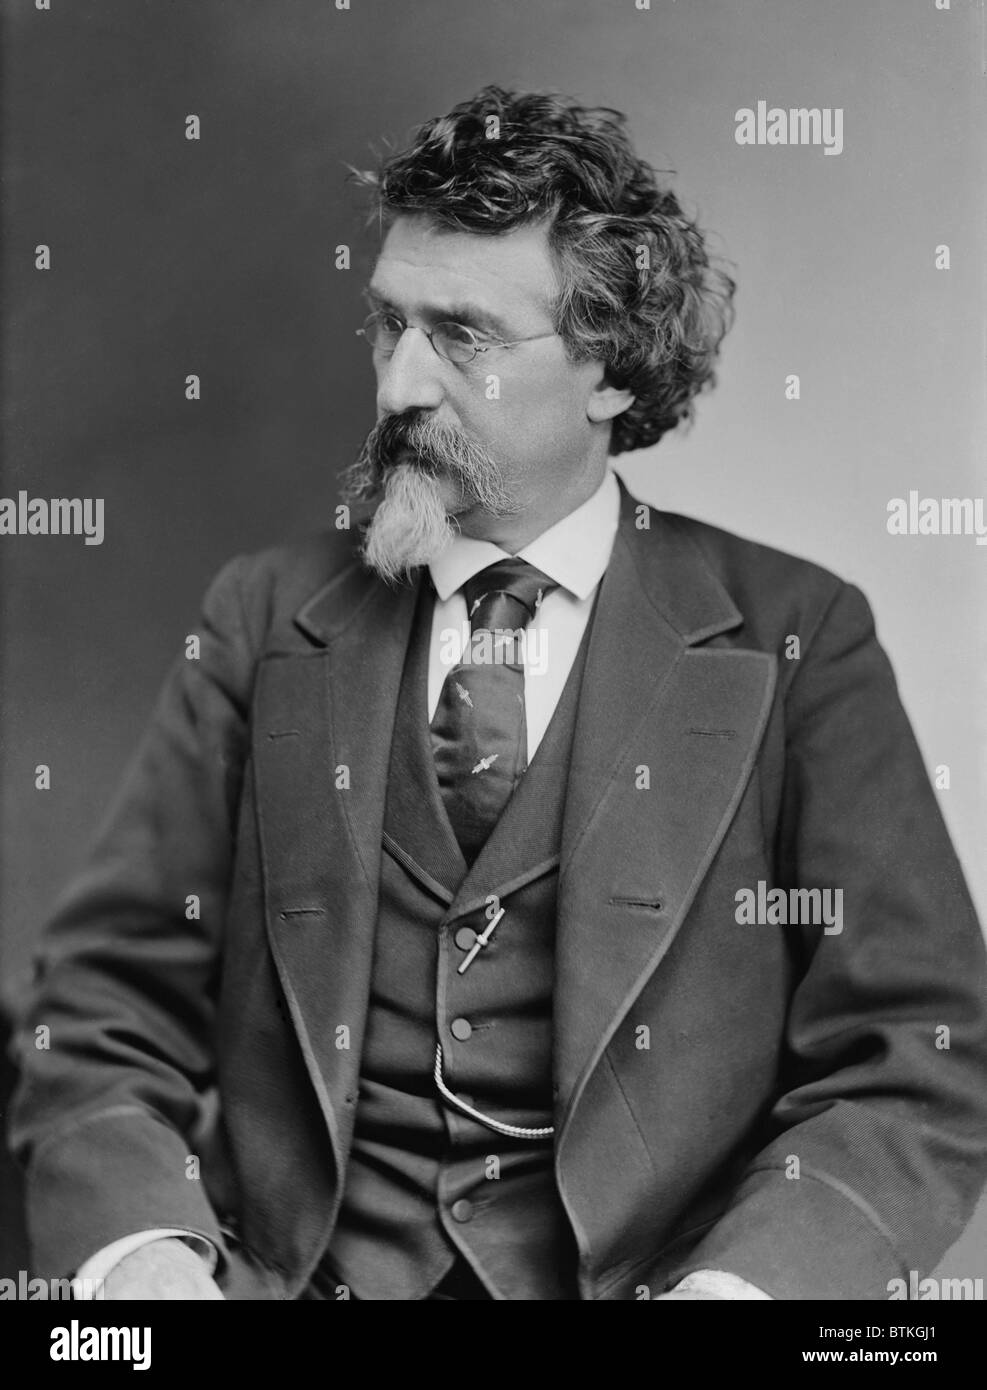 Mathew B. Brady (1823-1896), prominent American photographer, created a successful portrait business prior to the U.S. Civil War. To record the war, he hired many photographers including Alexander Gardner and Timothy H. O’Sullivan. Ca. 1870. Stock Photo